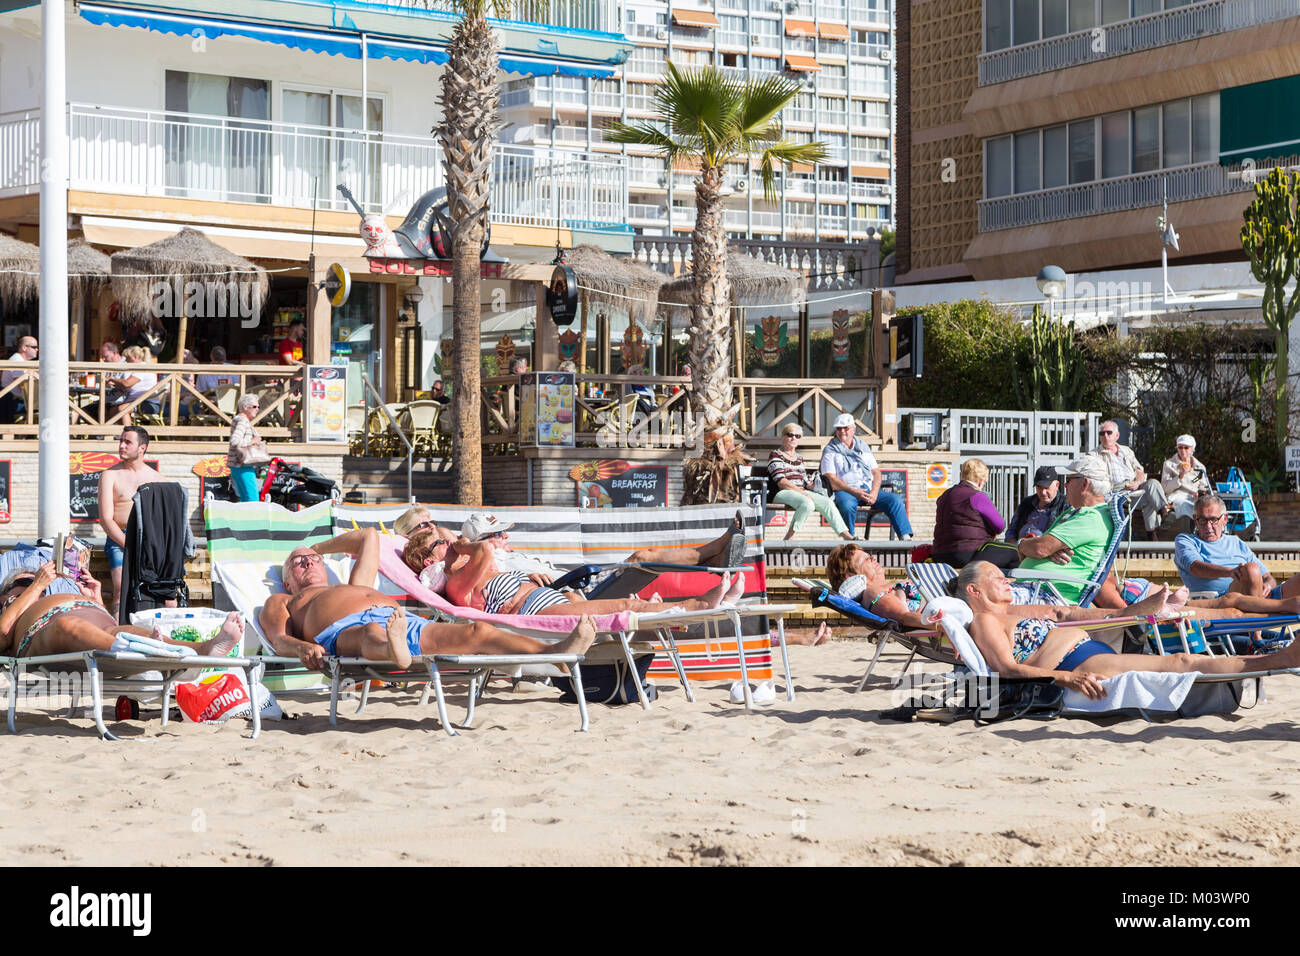 Levante Beach, Benidorm, Costa Blanca, Spain, 18 January 2018. British holidaymakers escape the cold weather in the UK. Tourists and locals enjoy the winter sun and daytime temperatures in the high 20's Celsius. Stock Photo